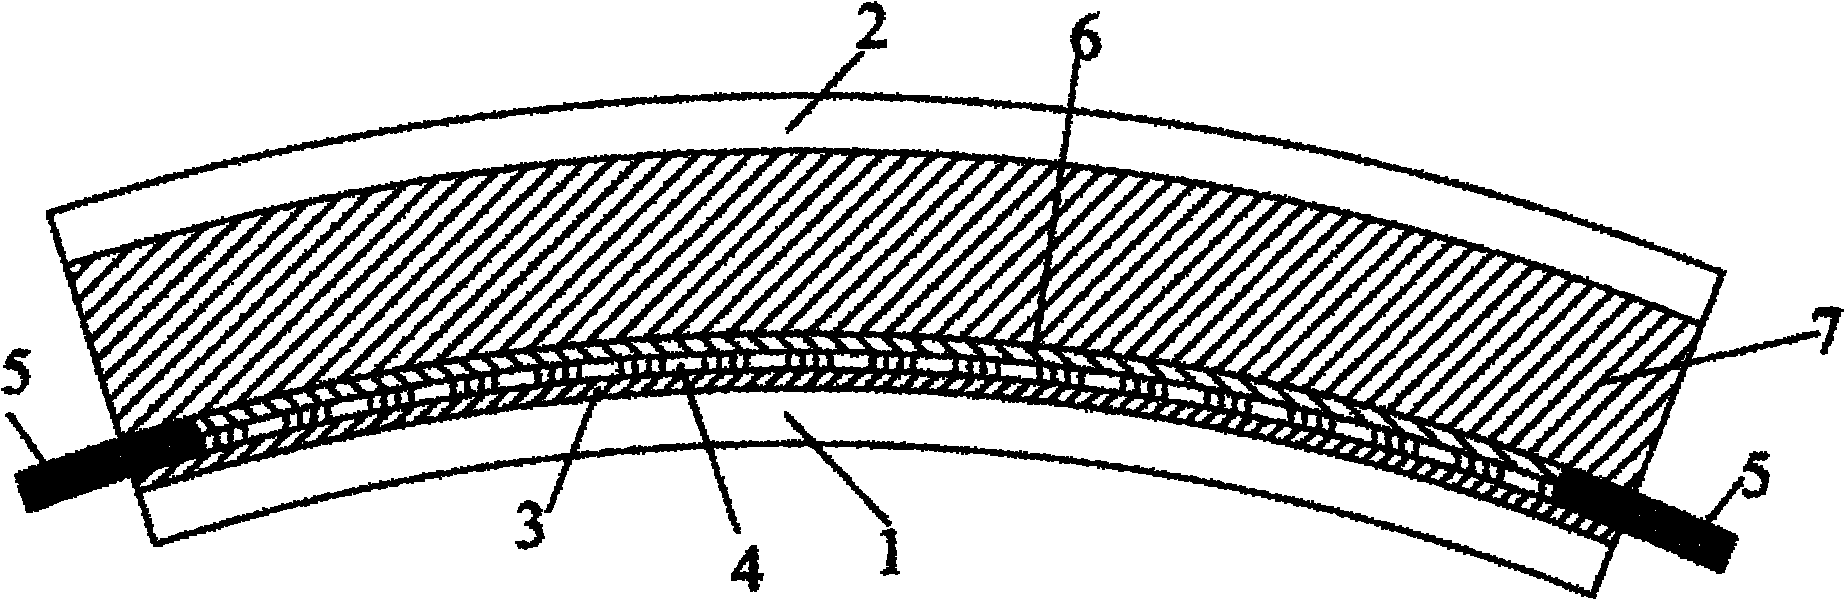 Compound functional sandwich glass containing metal nano-structured conductive layer